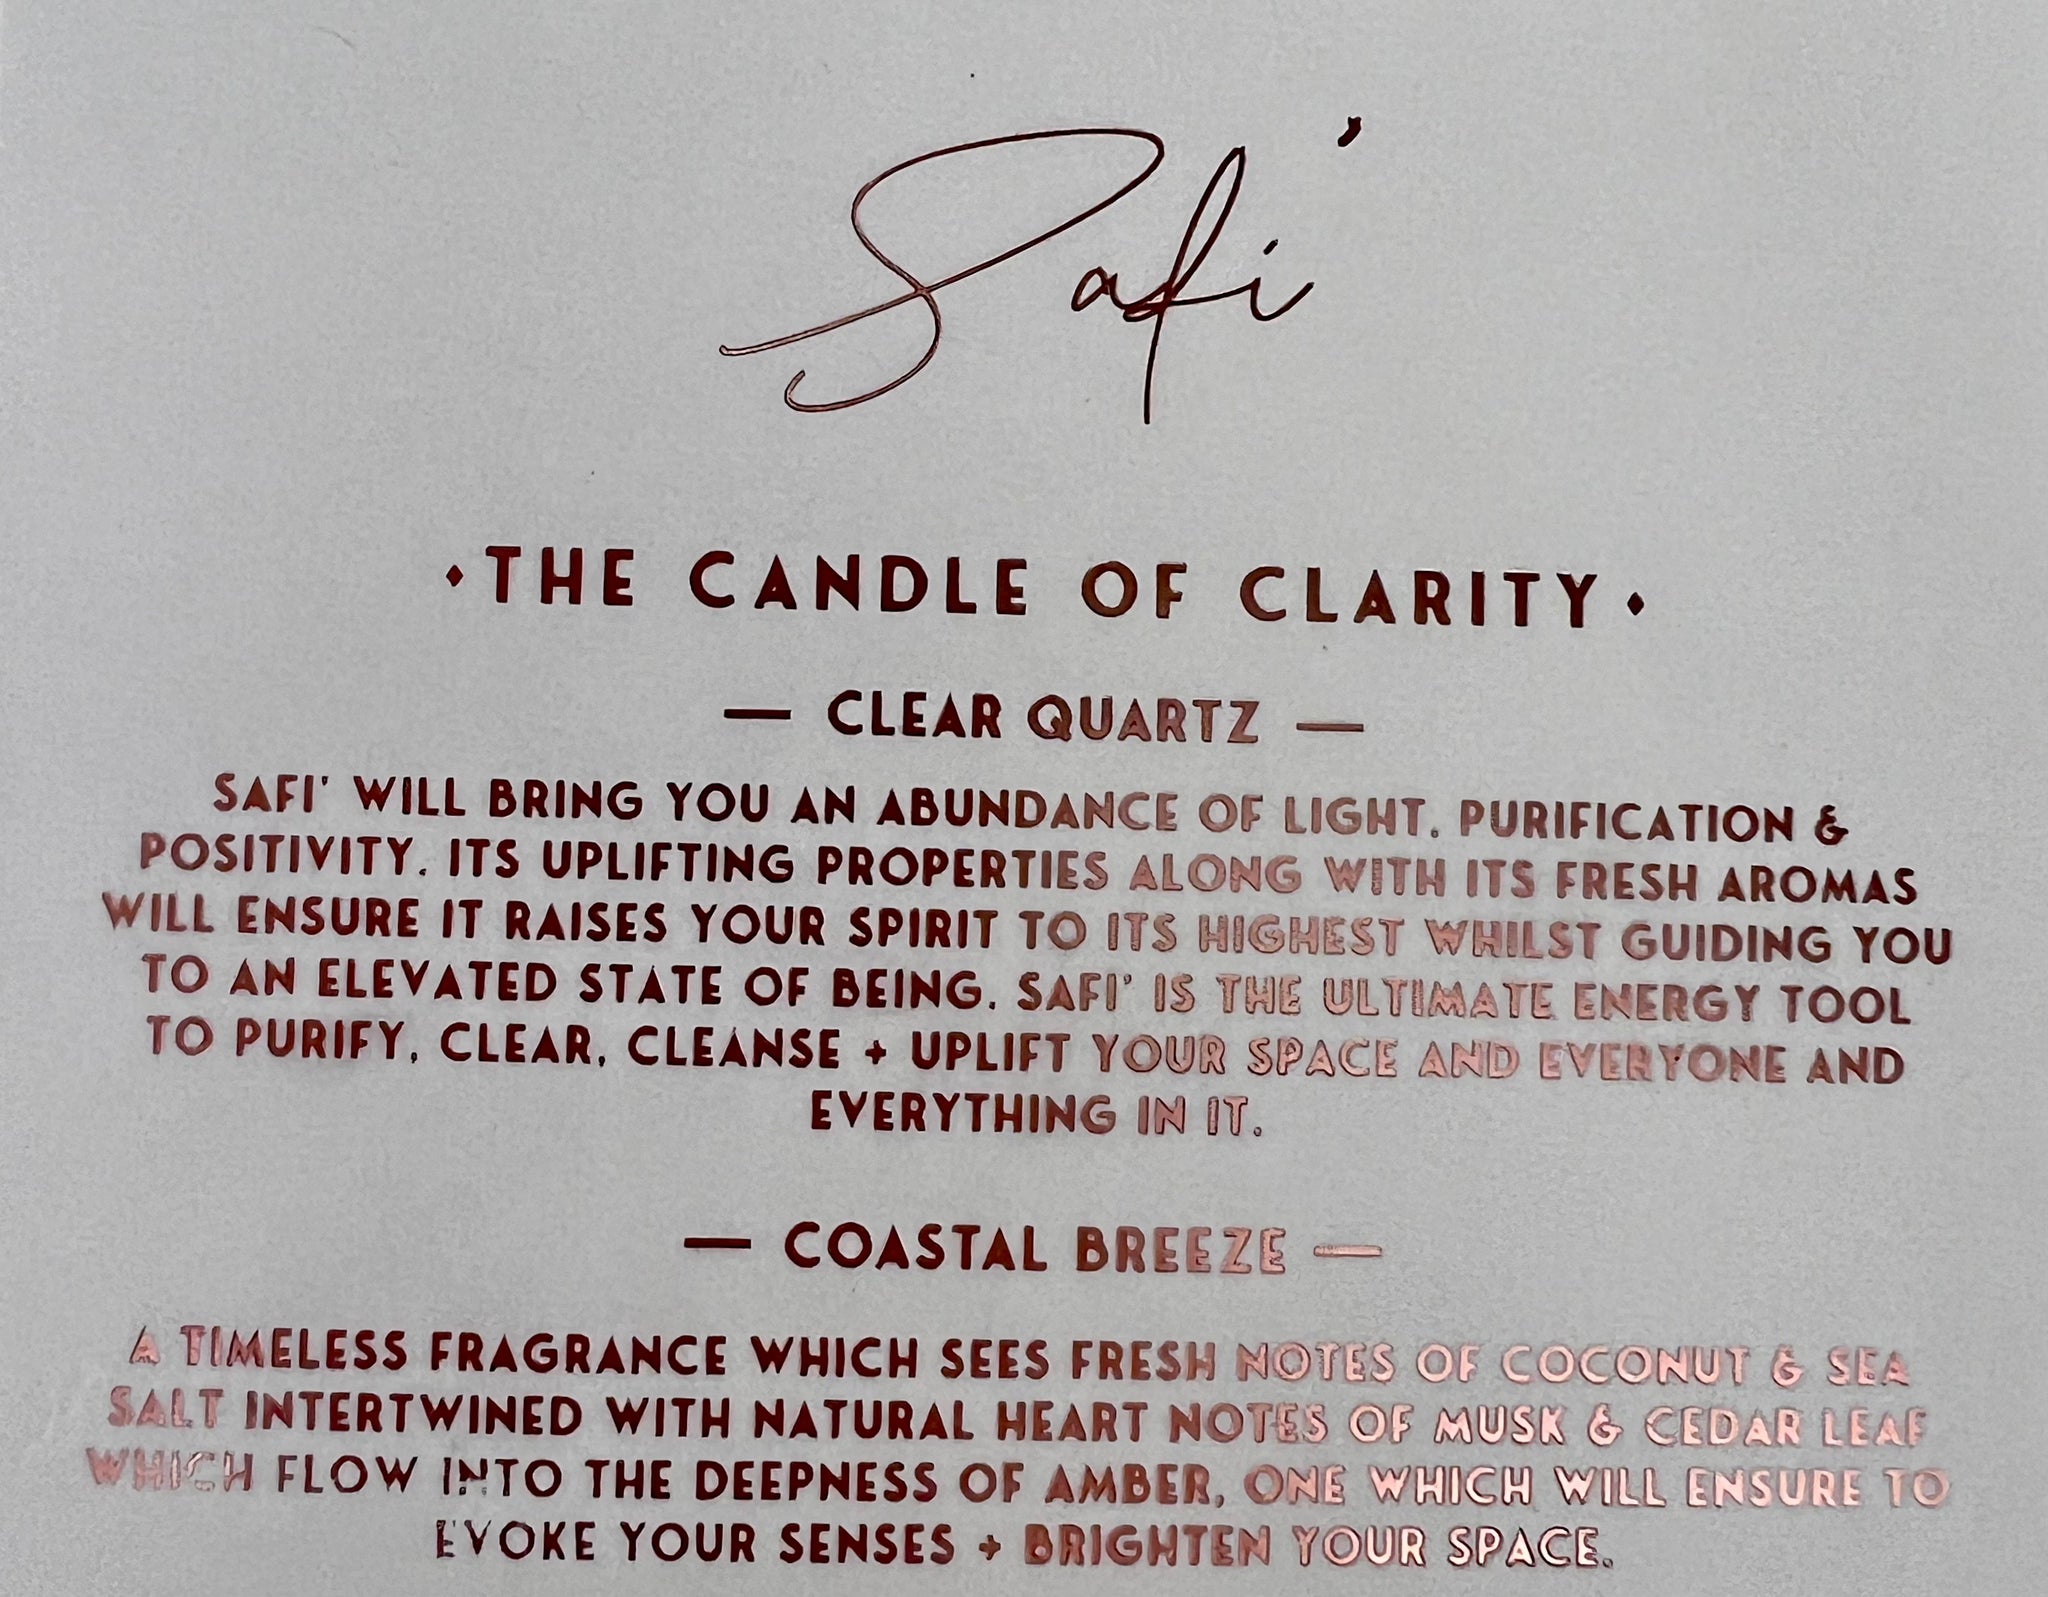 THREE SUNS - CRYSTAL CANDLE OF CLARITY